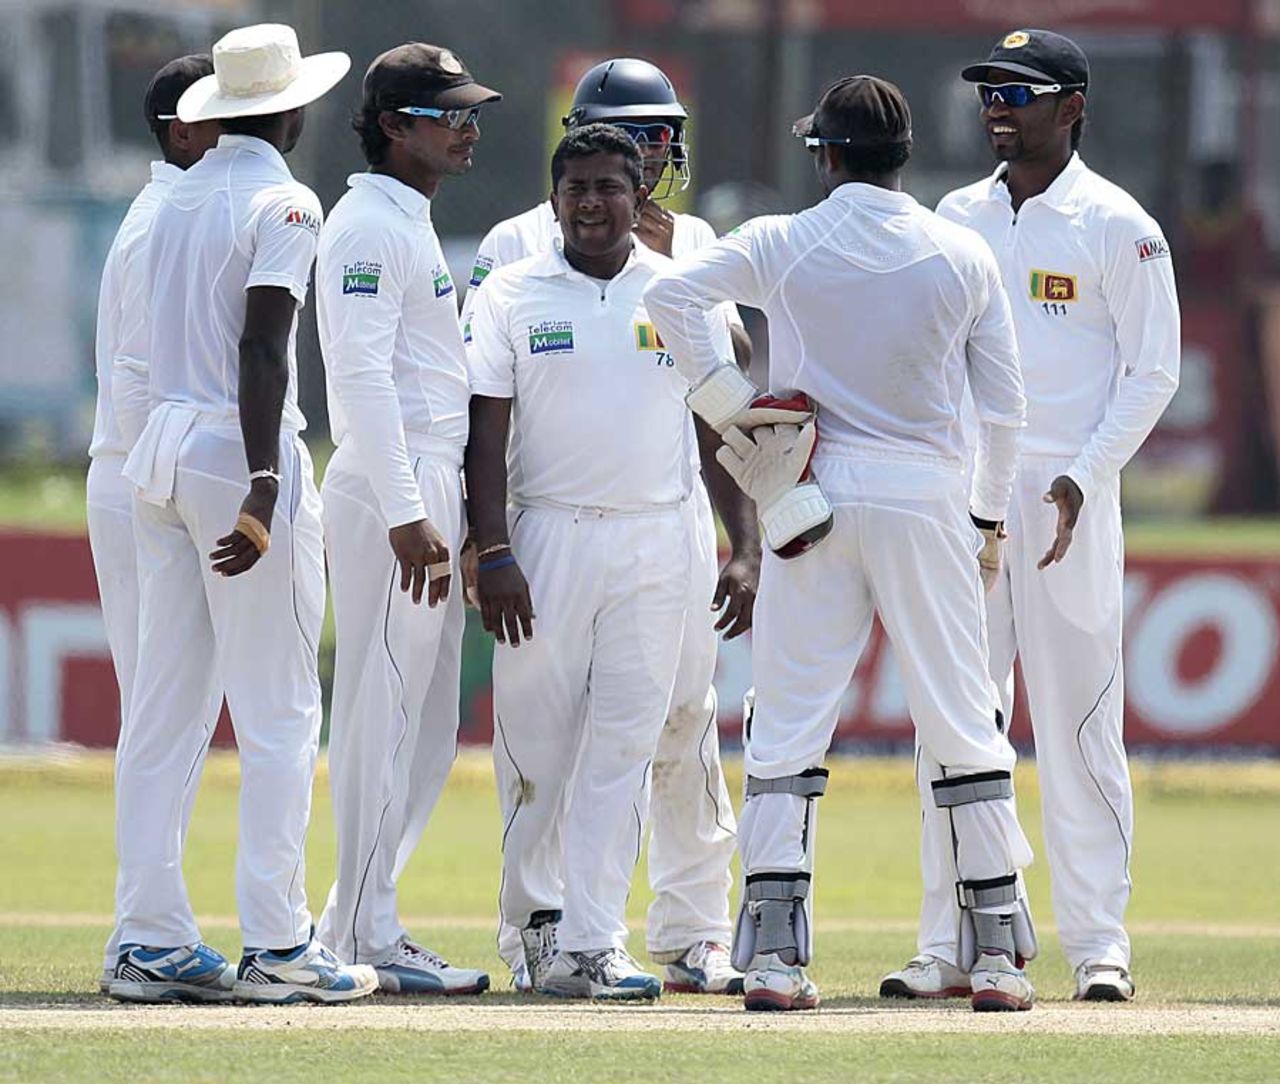 Rangana Herath picked up 6 for 43 in the second innings and finished with 11 in the match, Sri Lanka v New Zealand, 1st Test, Galle, 3rd day, November 19, 2012